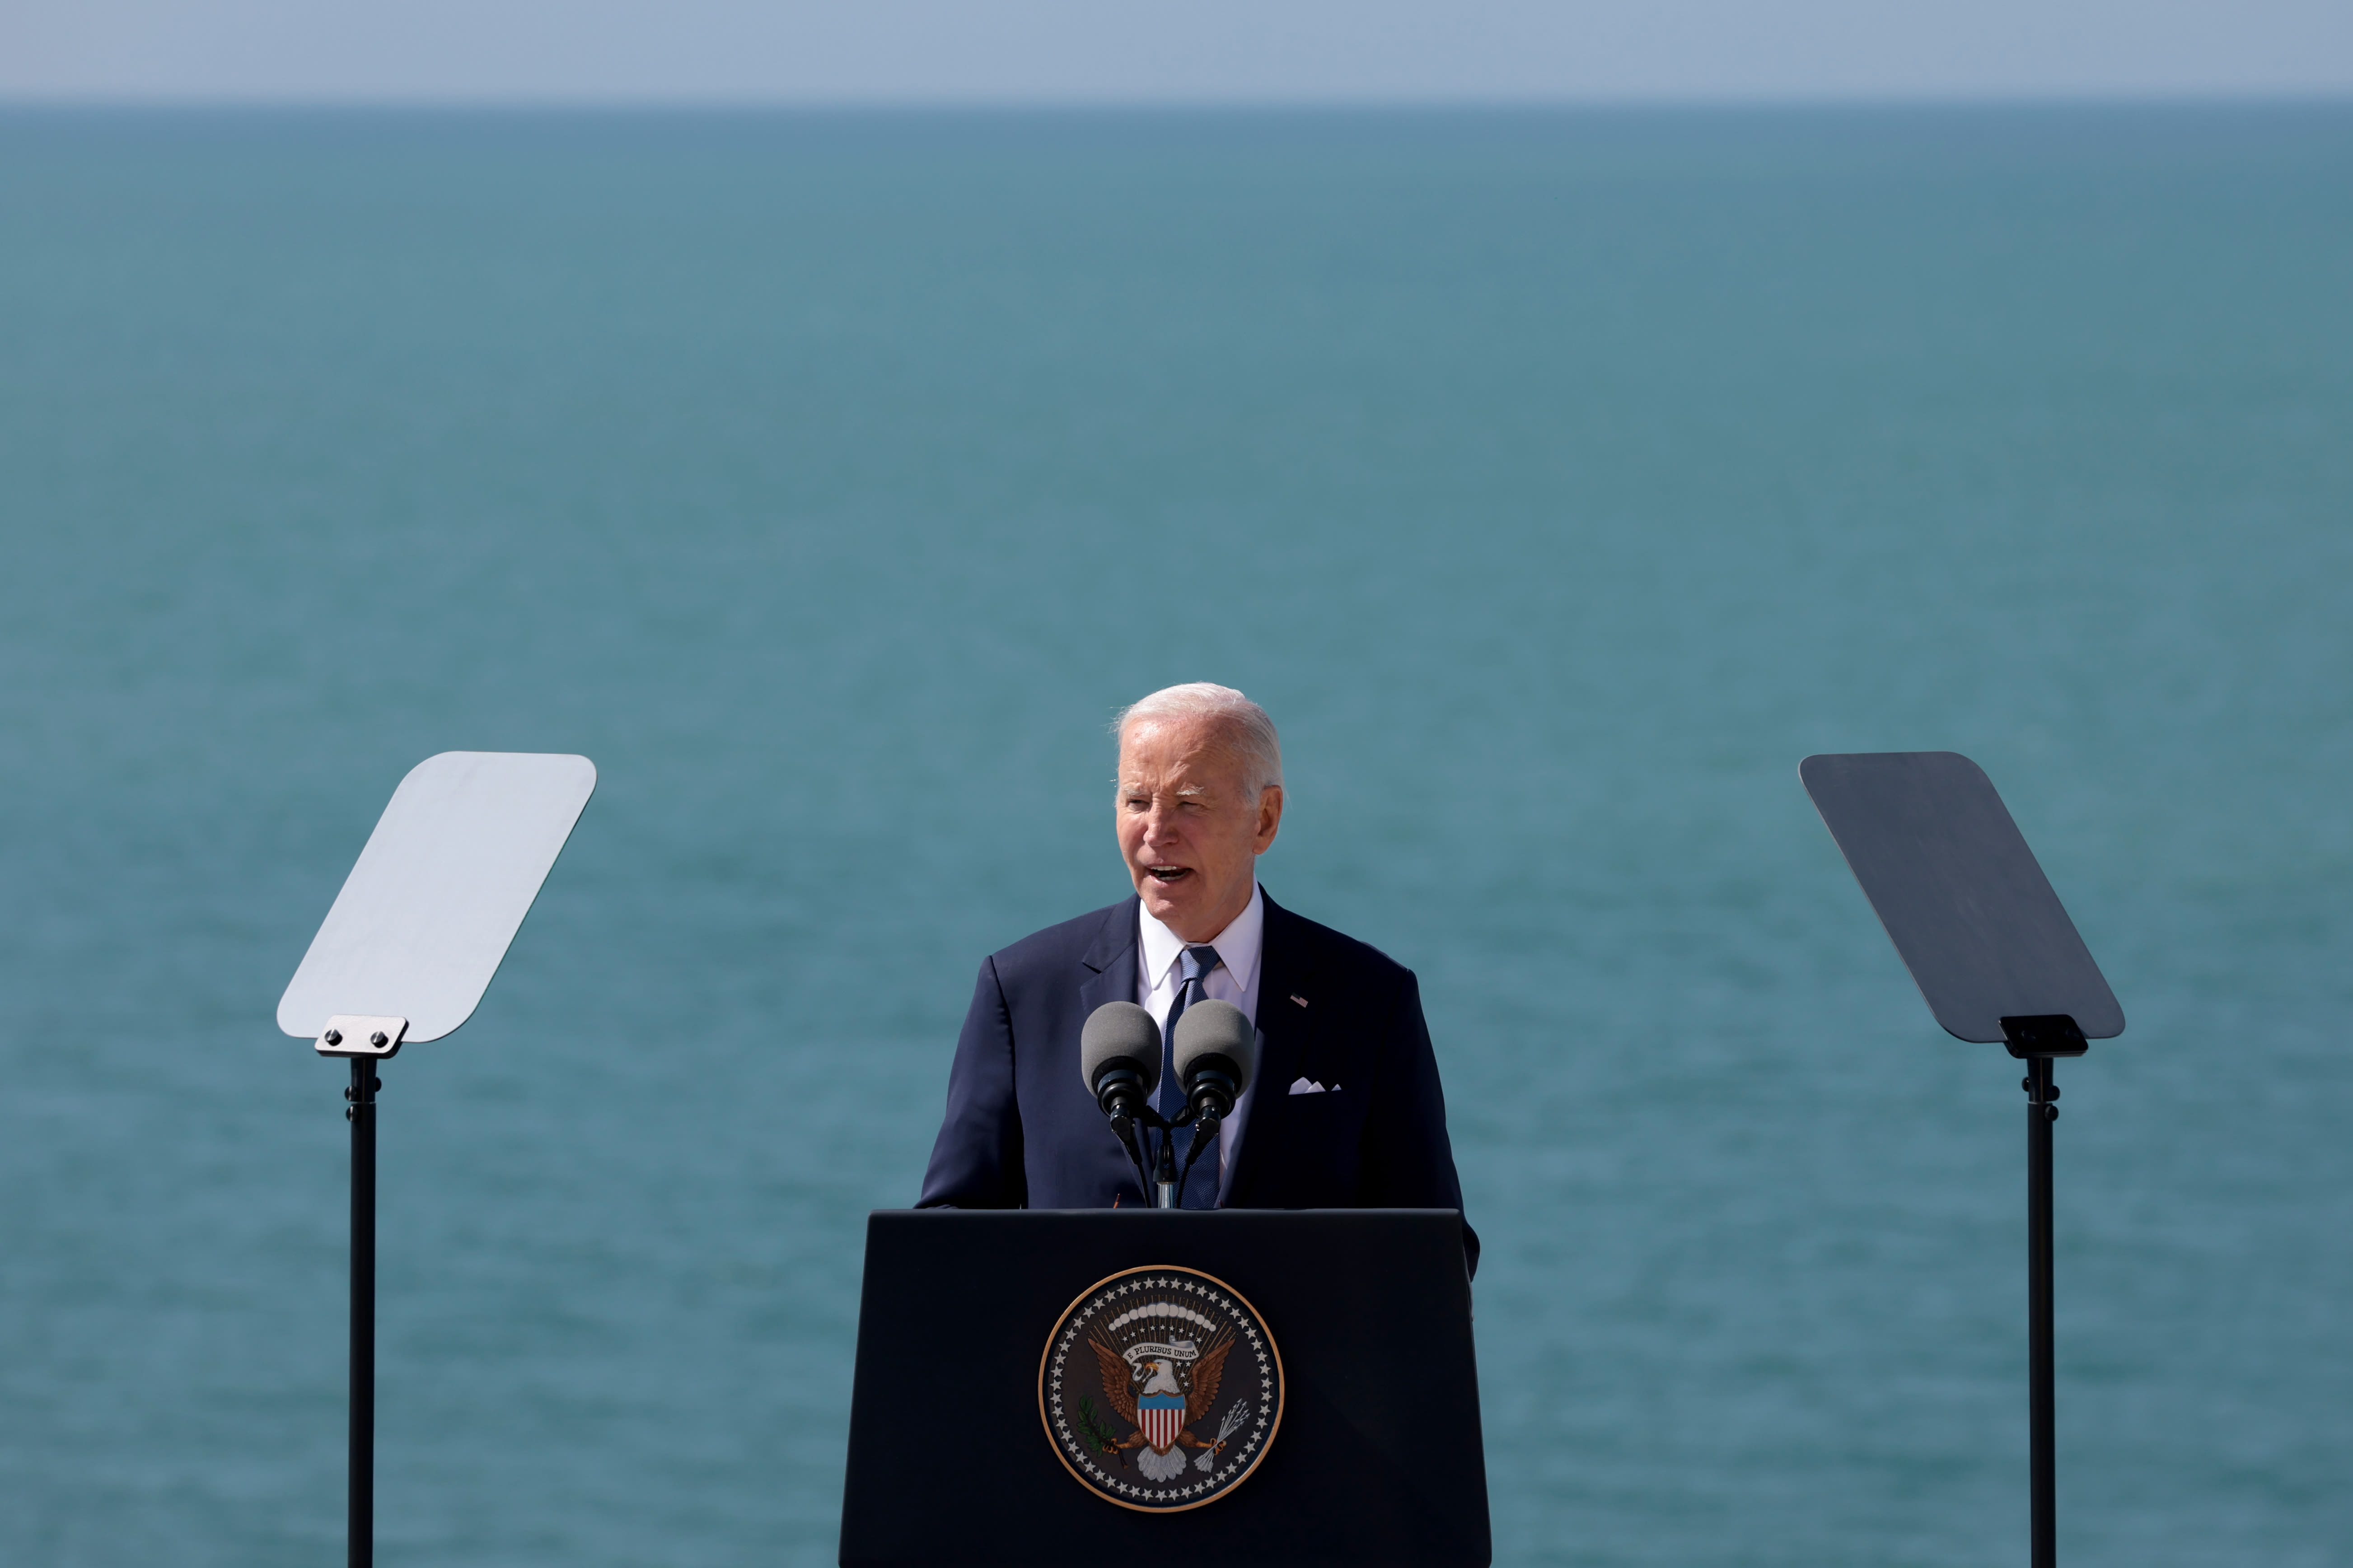 Joe Biden Invokes D-Day Heroism In Speech Calling For Saving Democracy: “They’re Asking Us To Stay True To What...